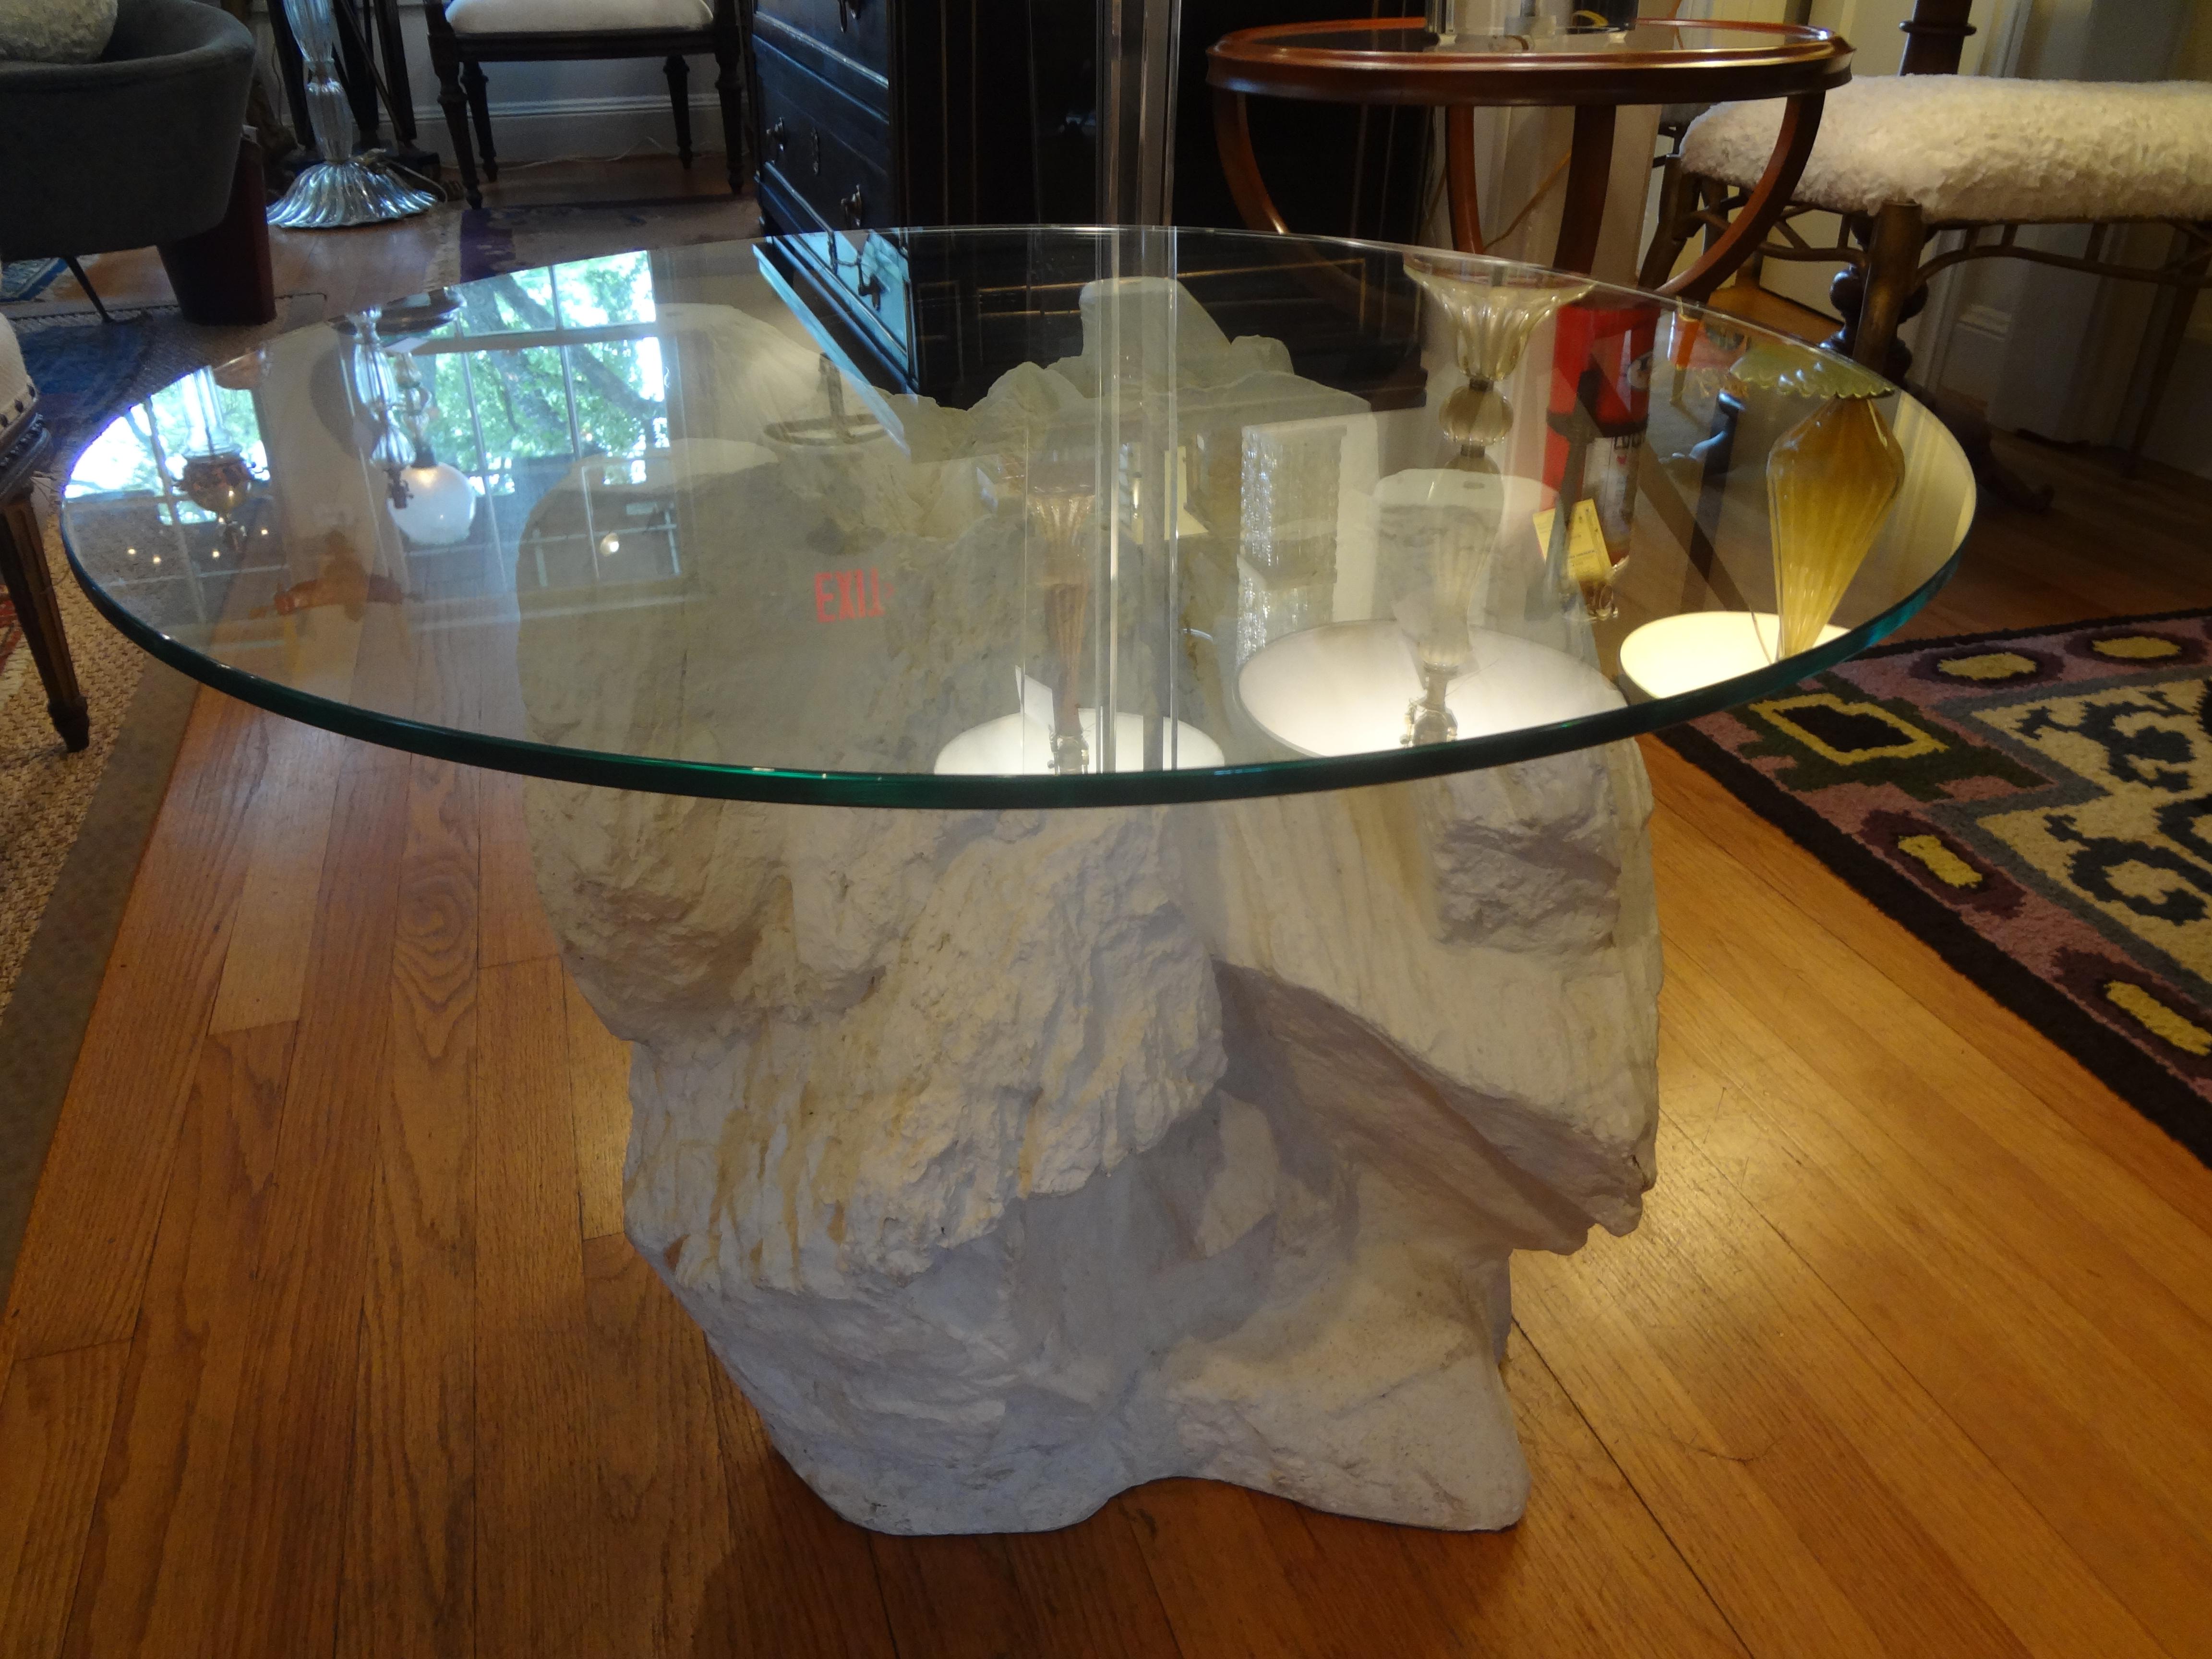 Pair of postmodern Serge Roche inspired faux stone plaster tables.
Stunning pair of vintage Serge Roche, Dorothy Draper, Sirmos or John Dickinson inspired faux stone or faux rock plaster tables. This rare pair of Mid-Century Modern quarry tables